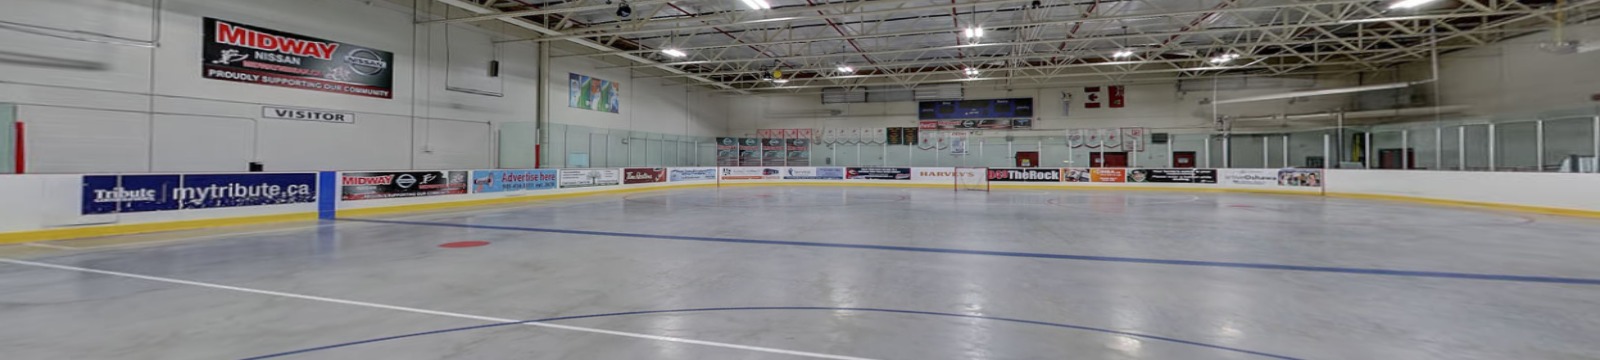 Donevan Recreation Complex Arena sponsored by Midway Nisson